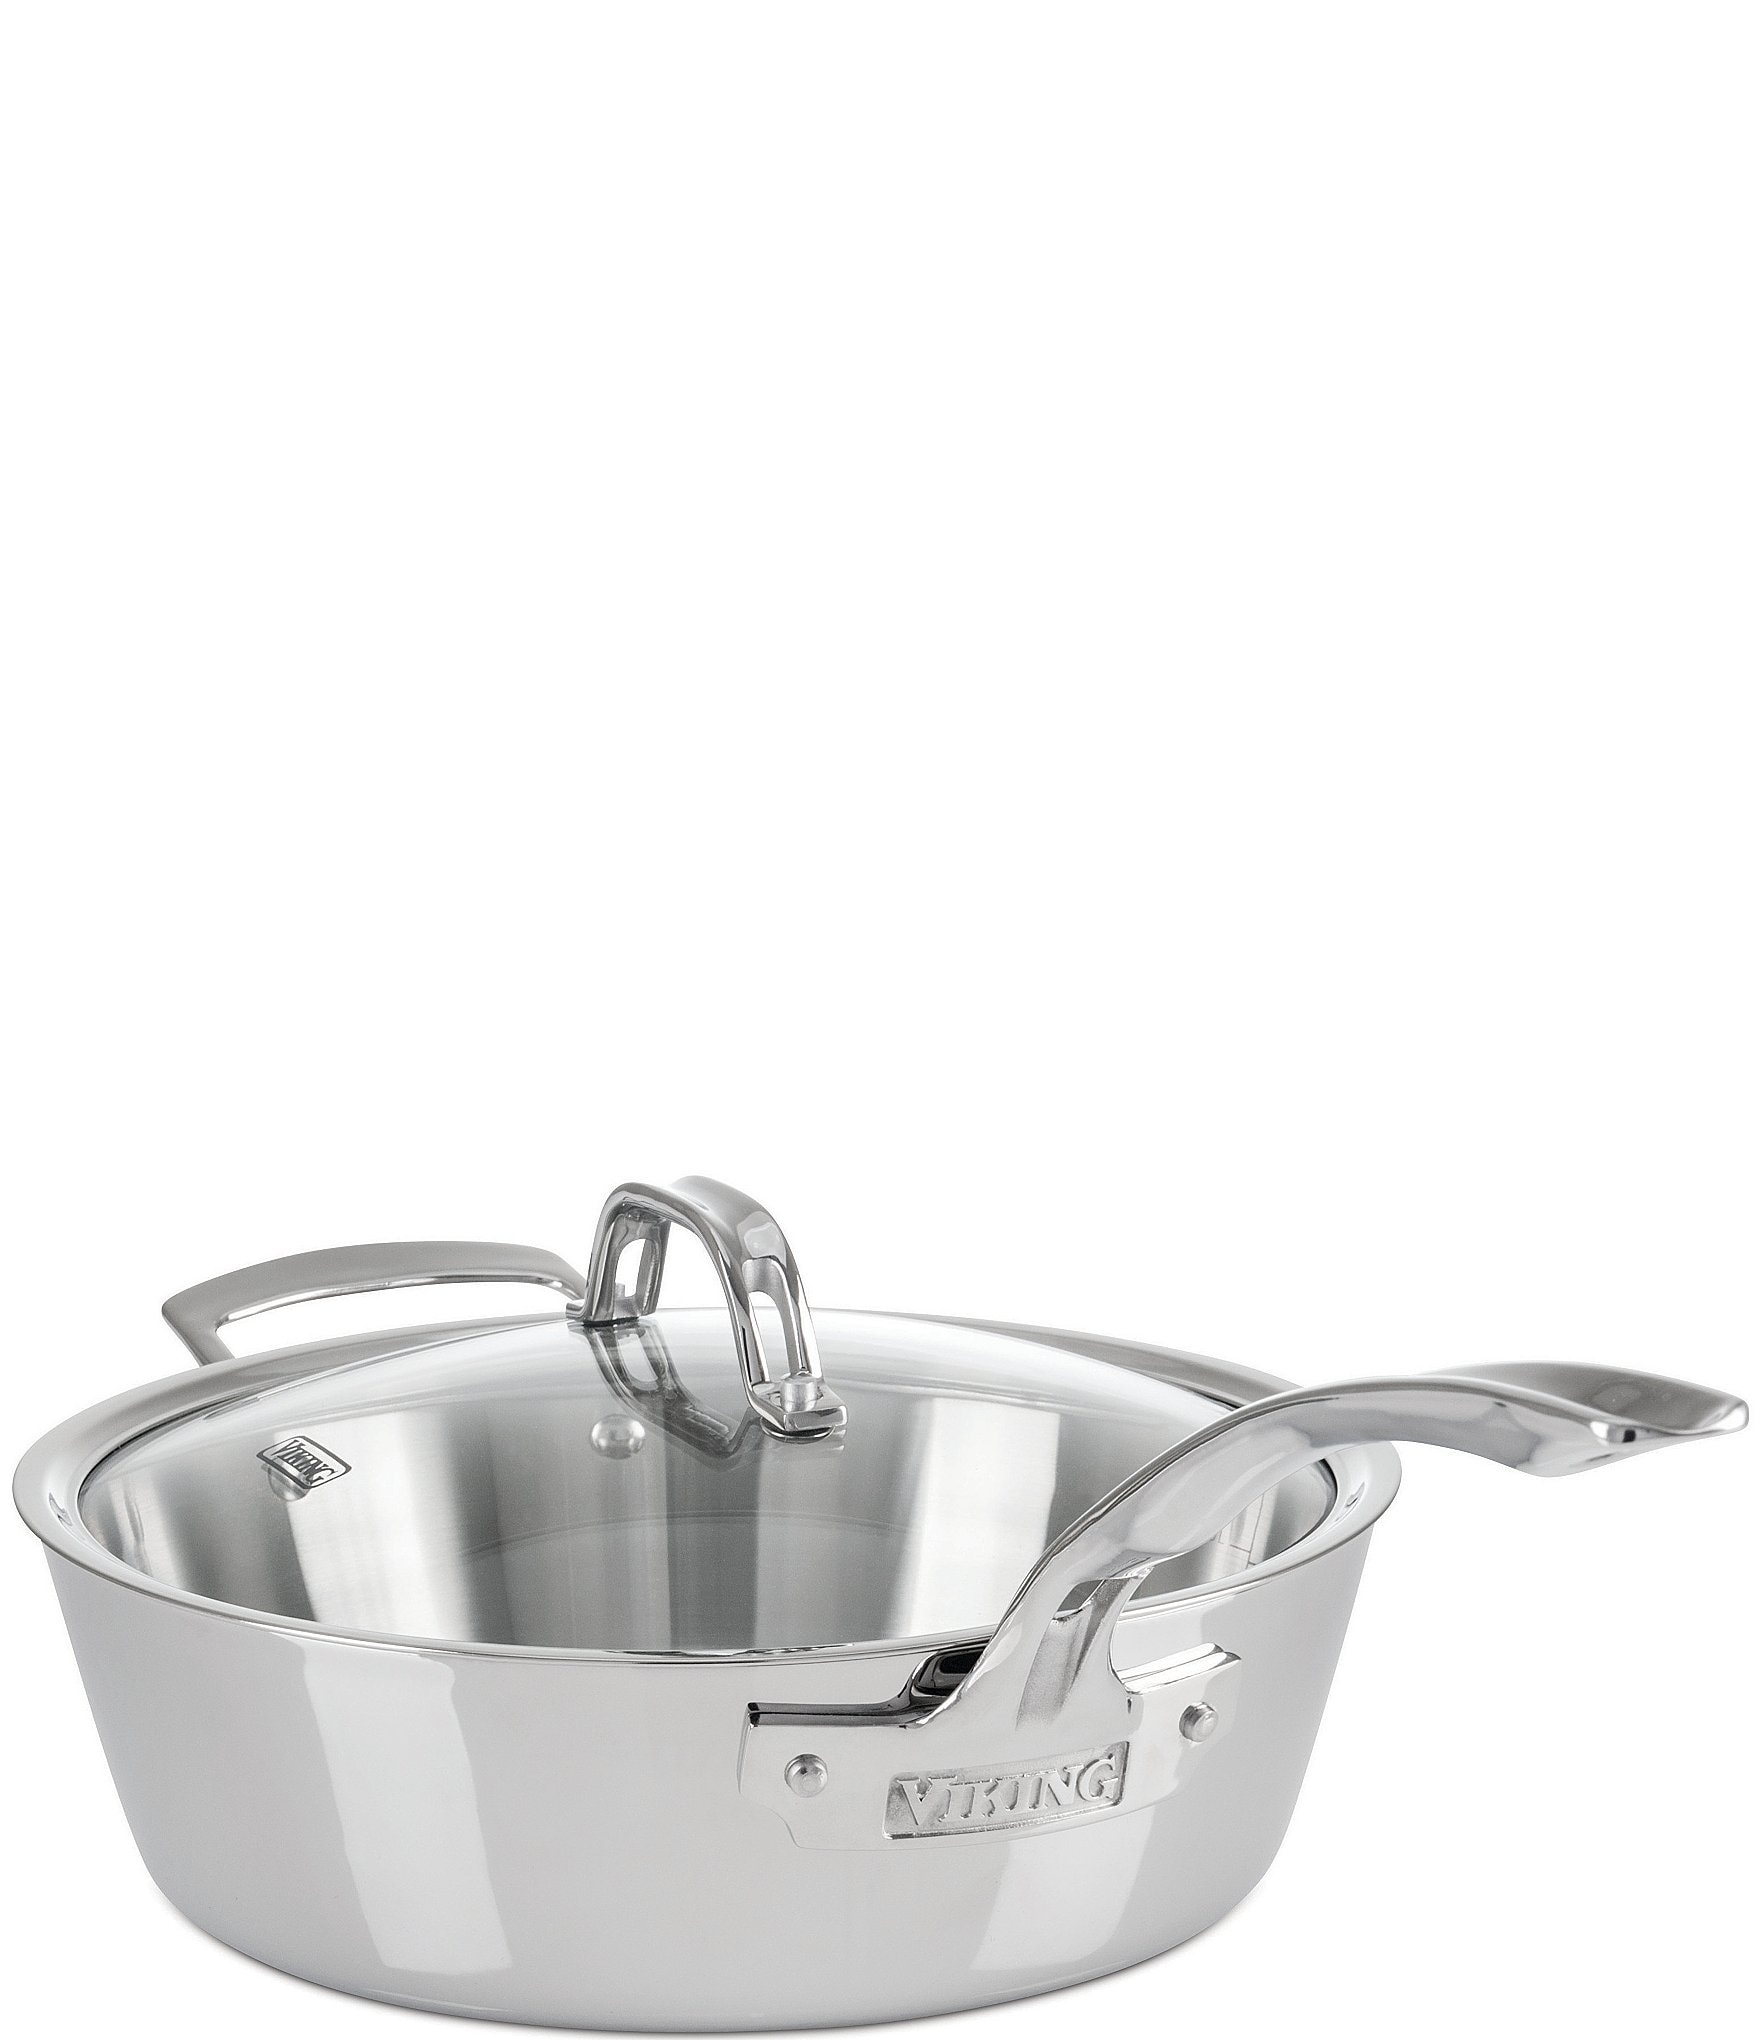 Viking Contemporary 3-Ply Stainless Steel Saucepan with Glass Lid 3 Quart 